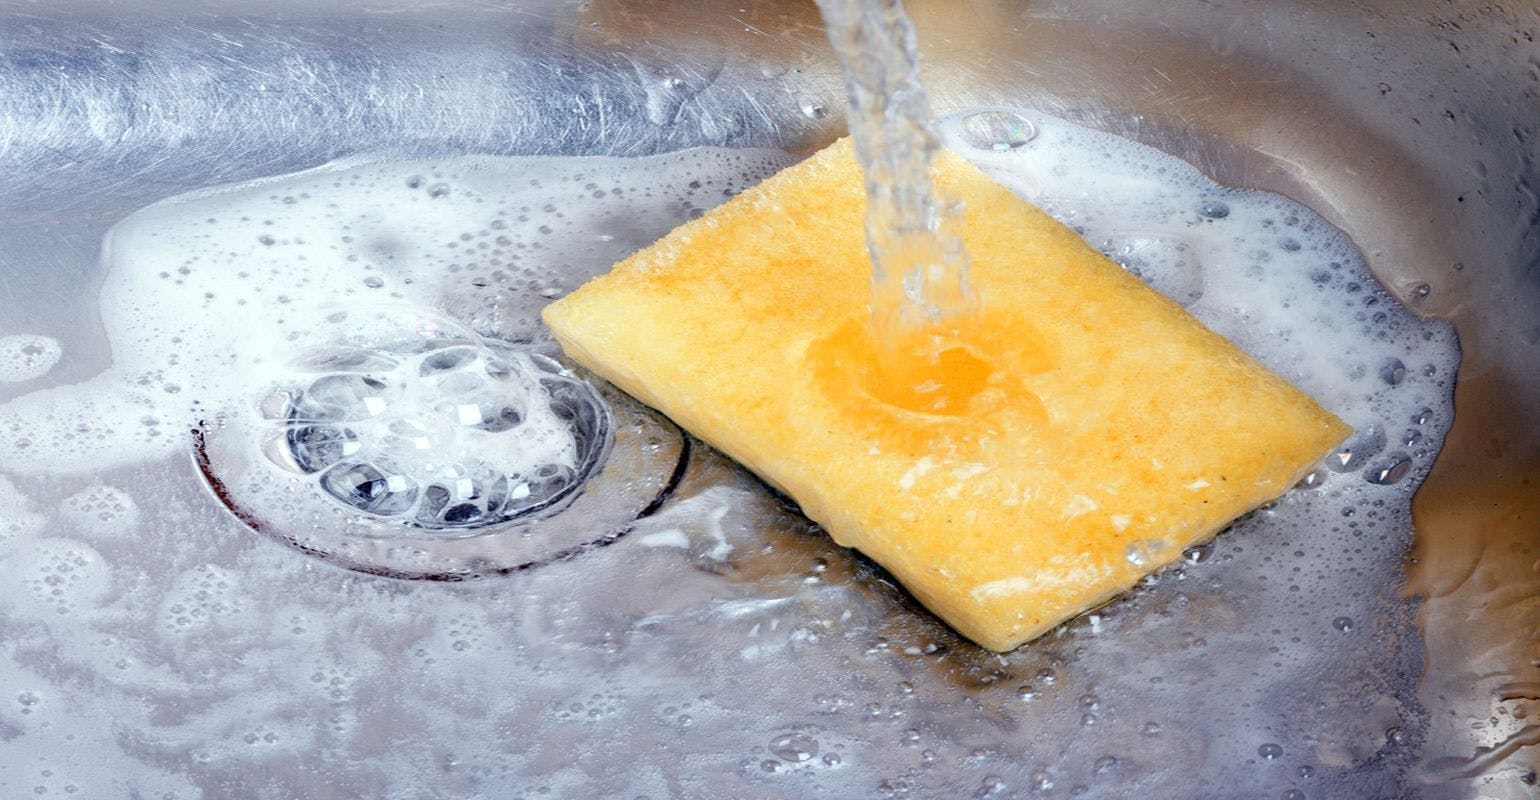 The Solution to Antibiotic Resistance Could be in Your Kitchen Sponge